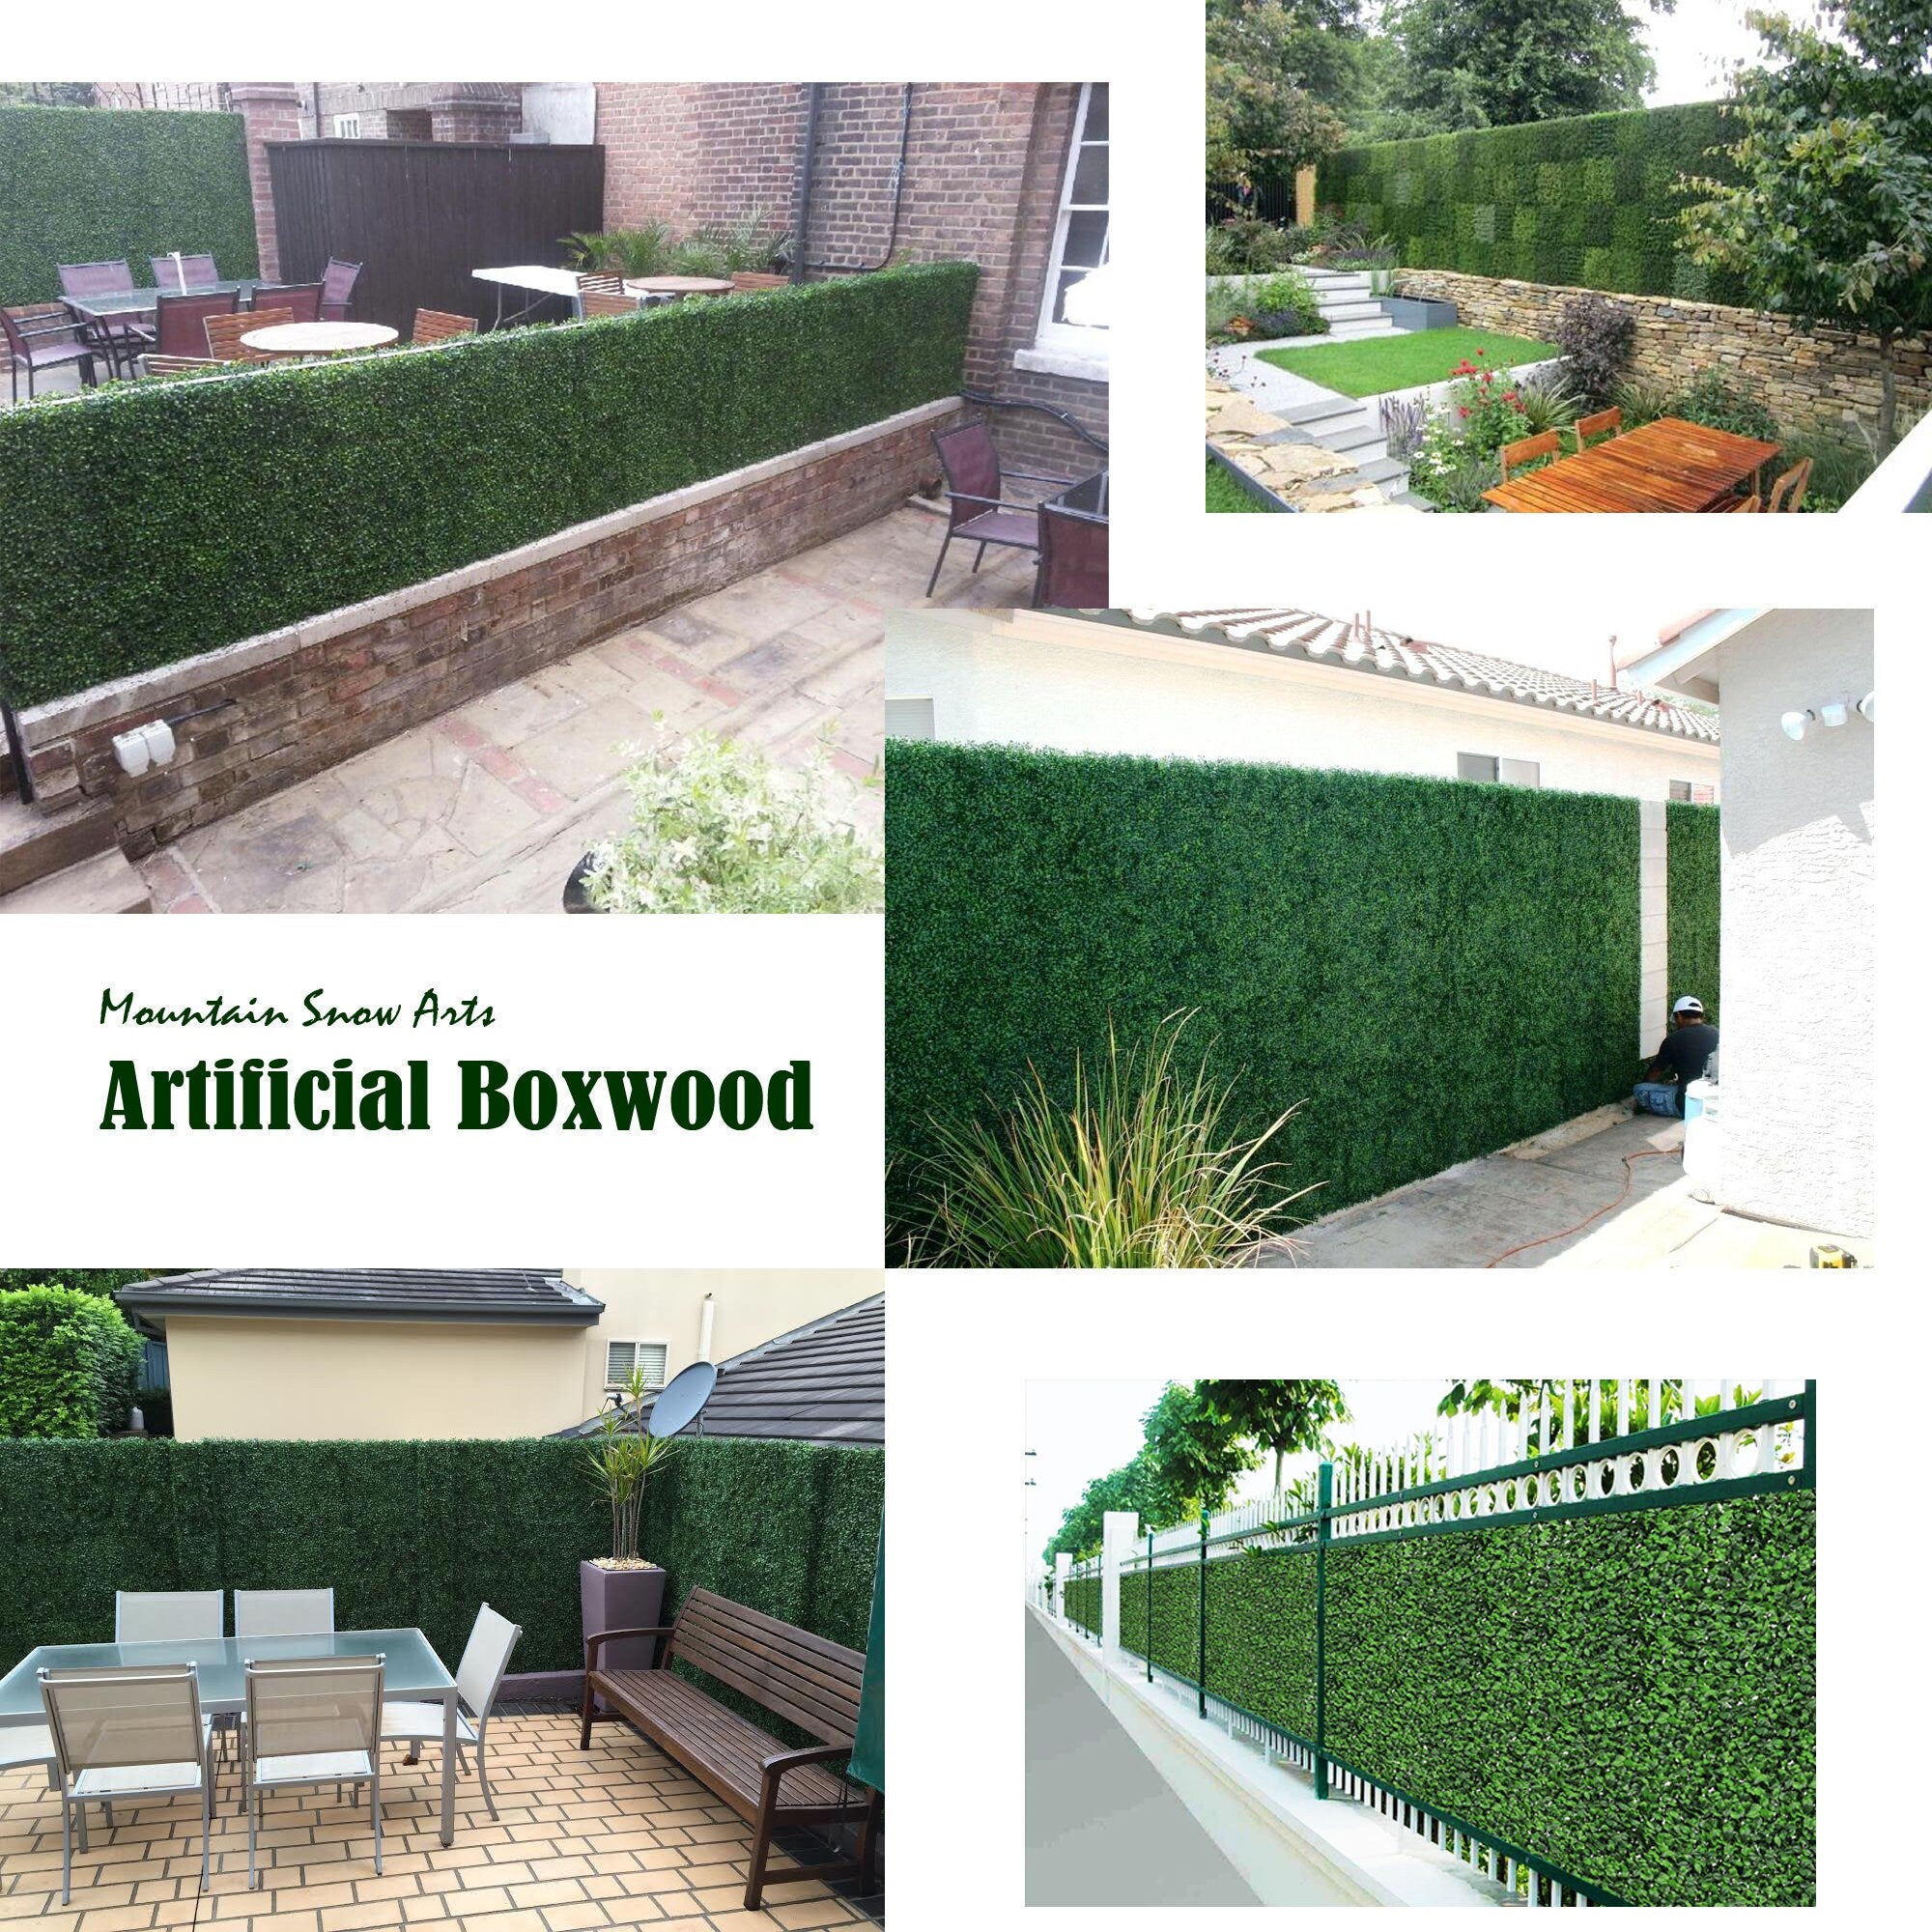 Artificial Boxwood Panels Topiary Hedge Plant UV Protected Privacy Screen Outdoor Indoor Use Garden Fence Home Decor 20x20" DarkGreen Panels